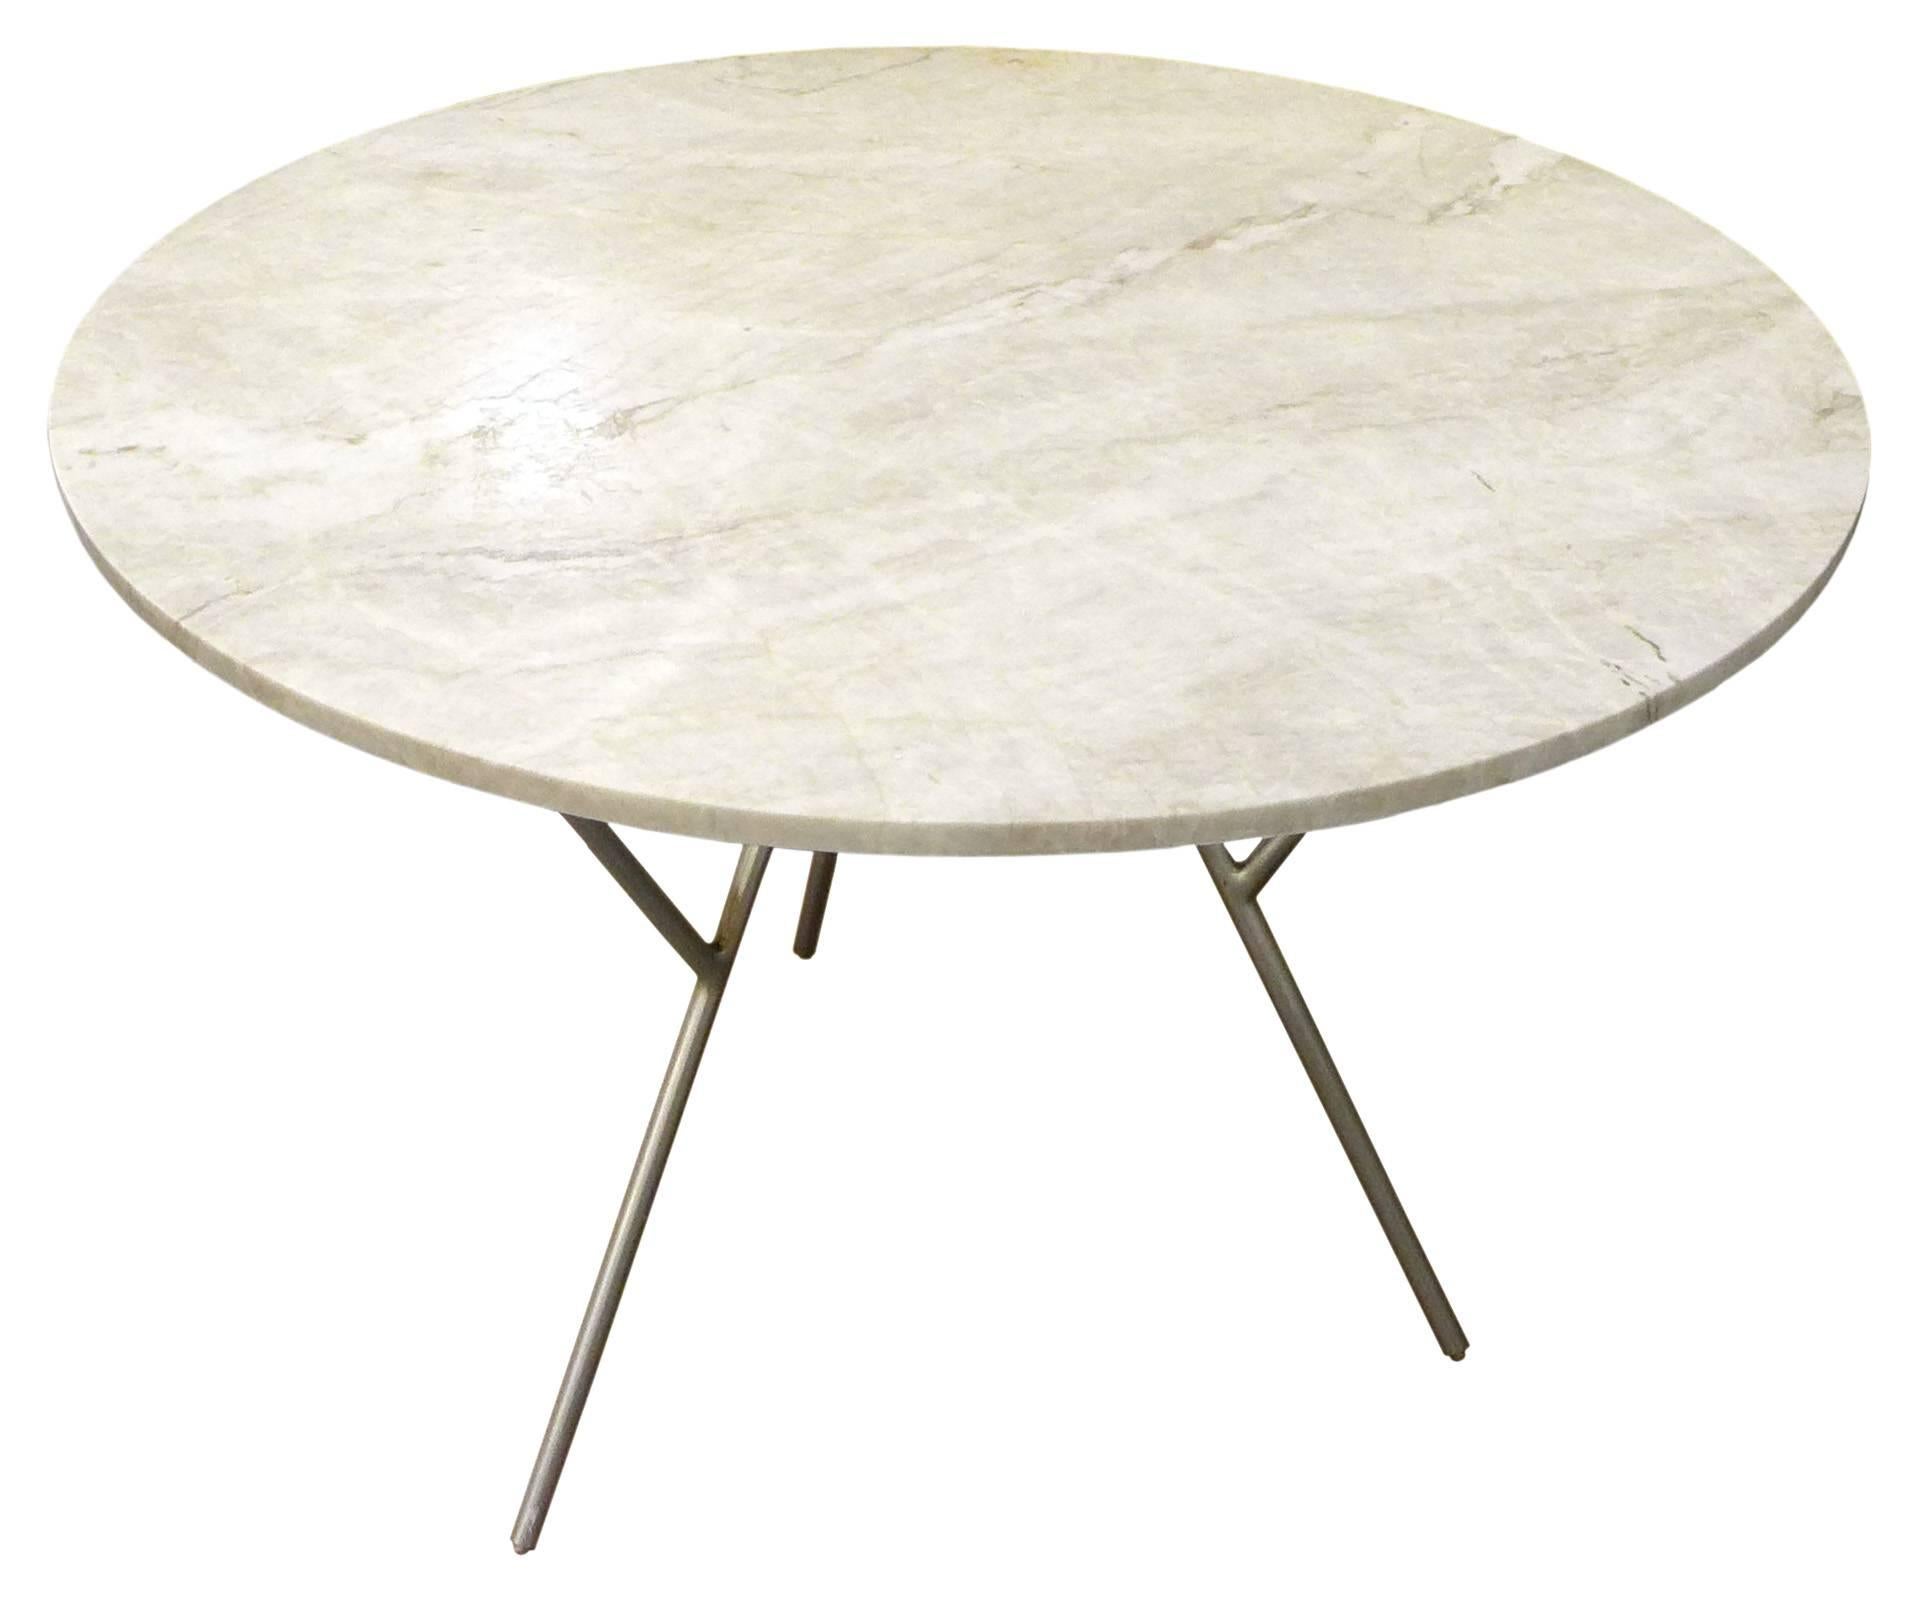 American Round Travertine and Steel Dining Table